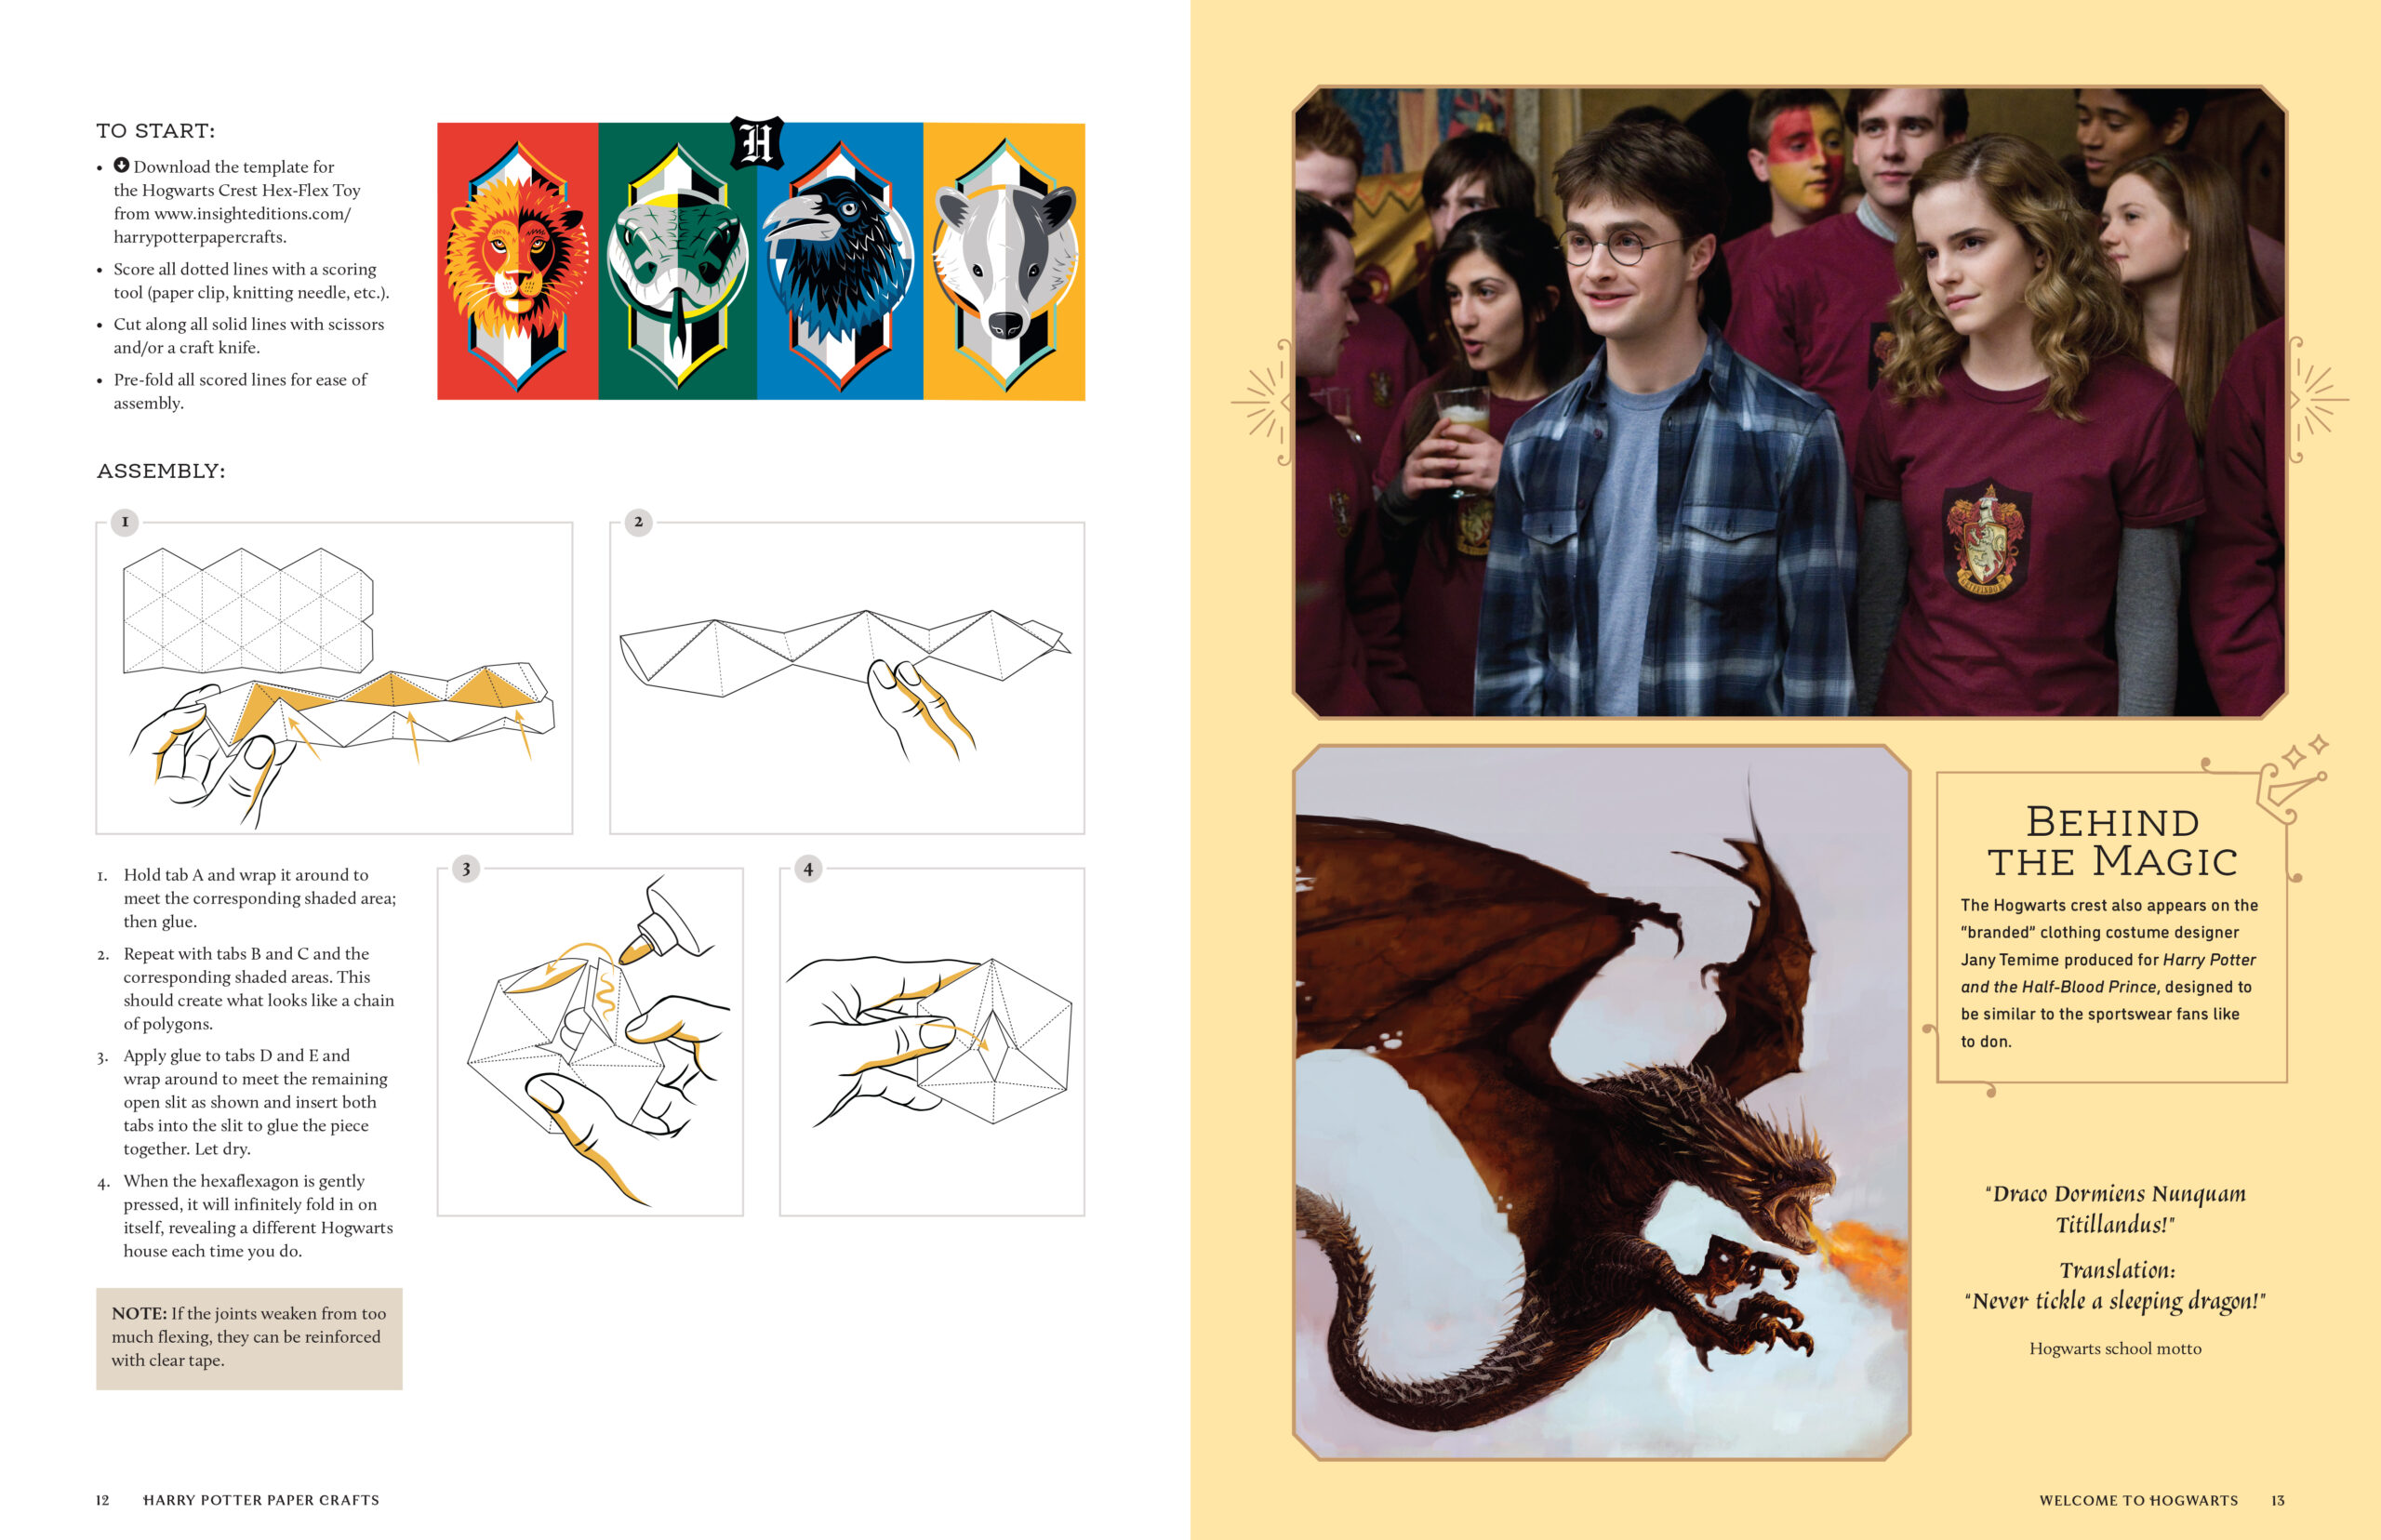 “Harry Potter: Magical Paper Crafts” features facts about the films.